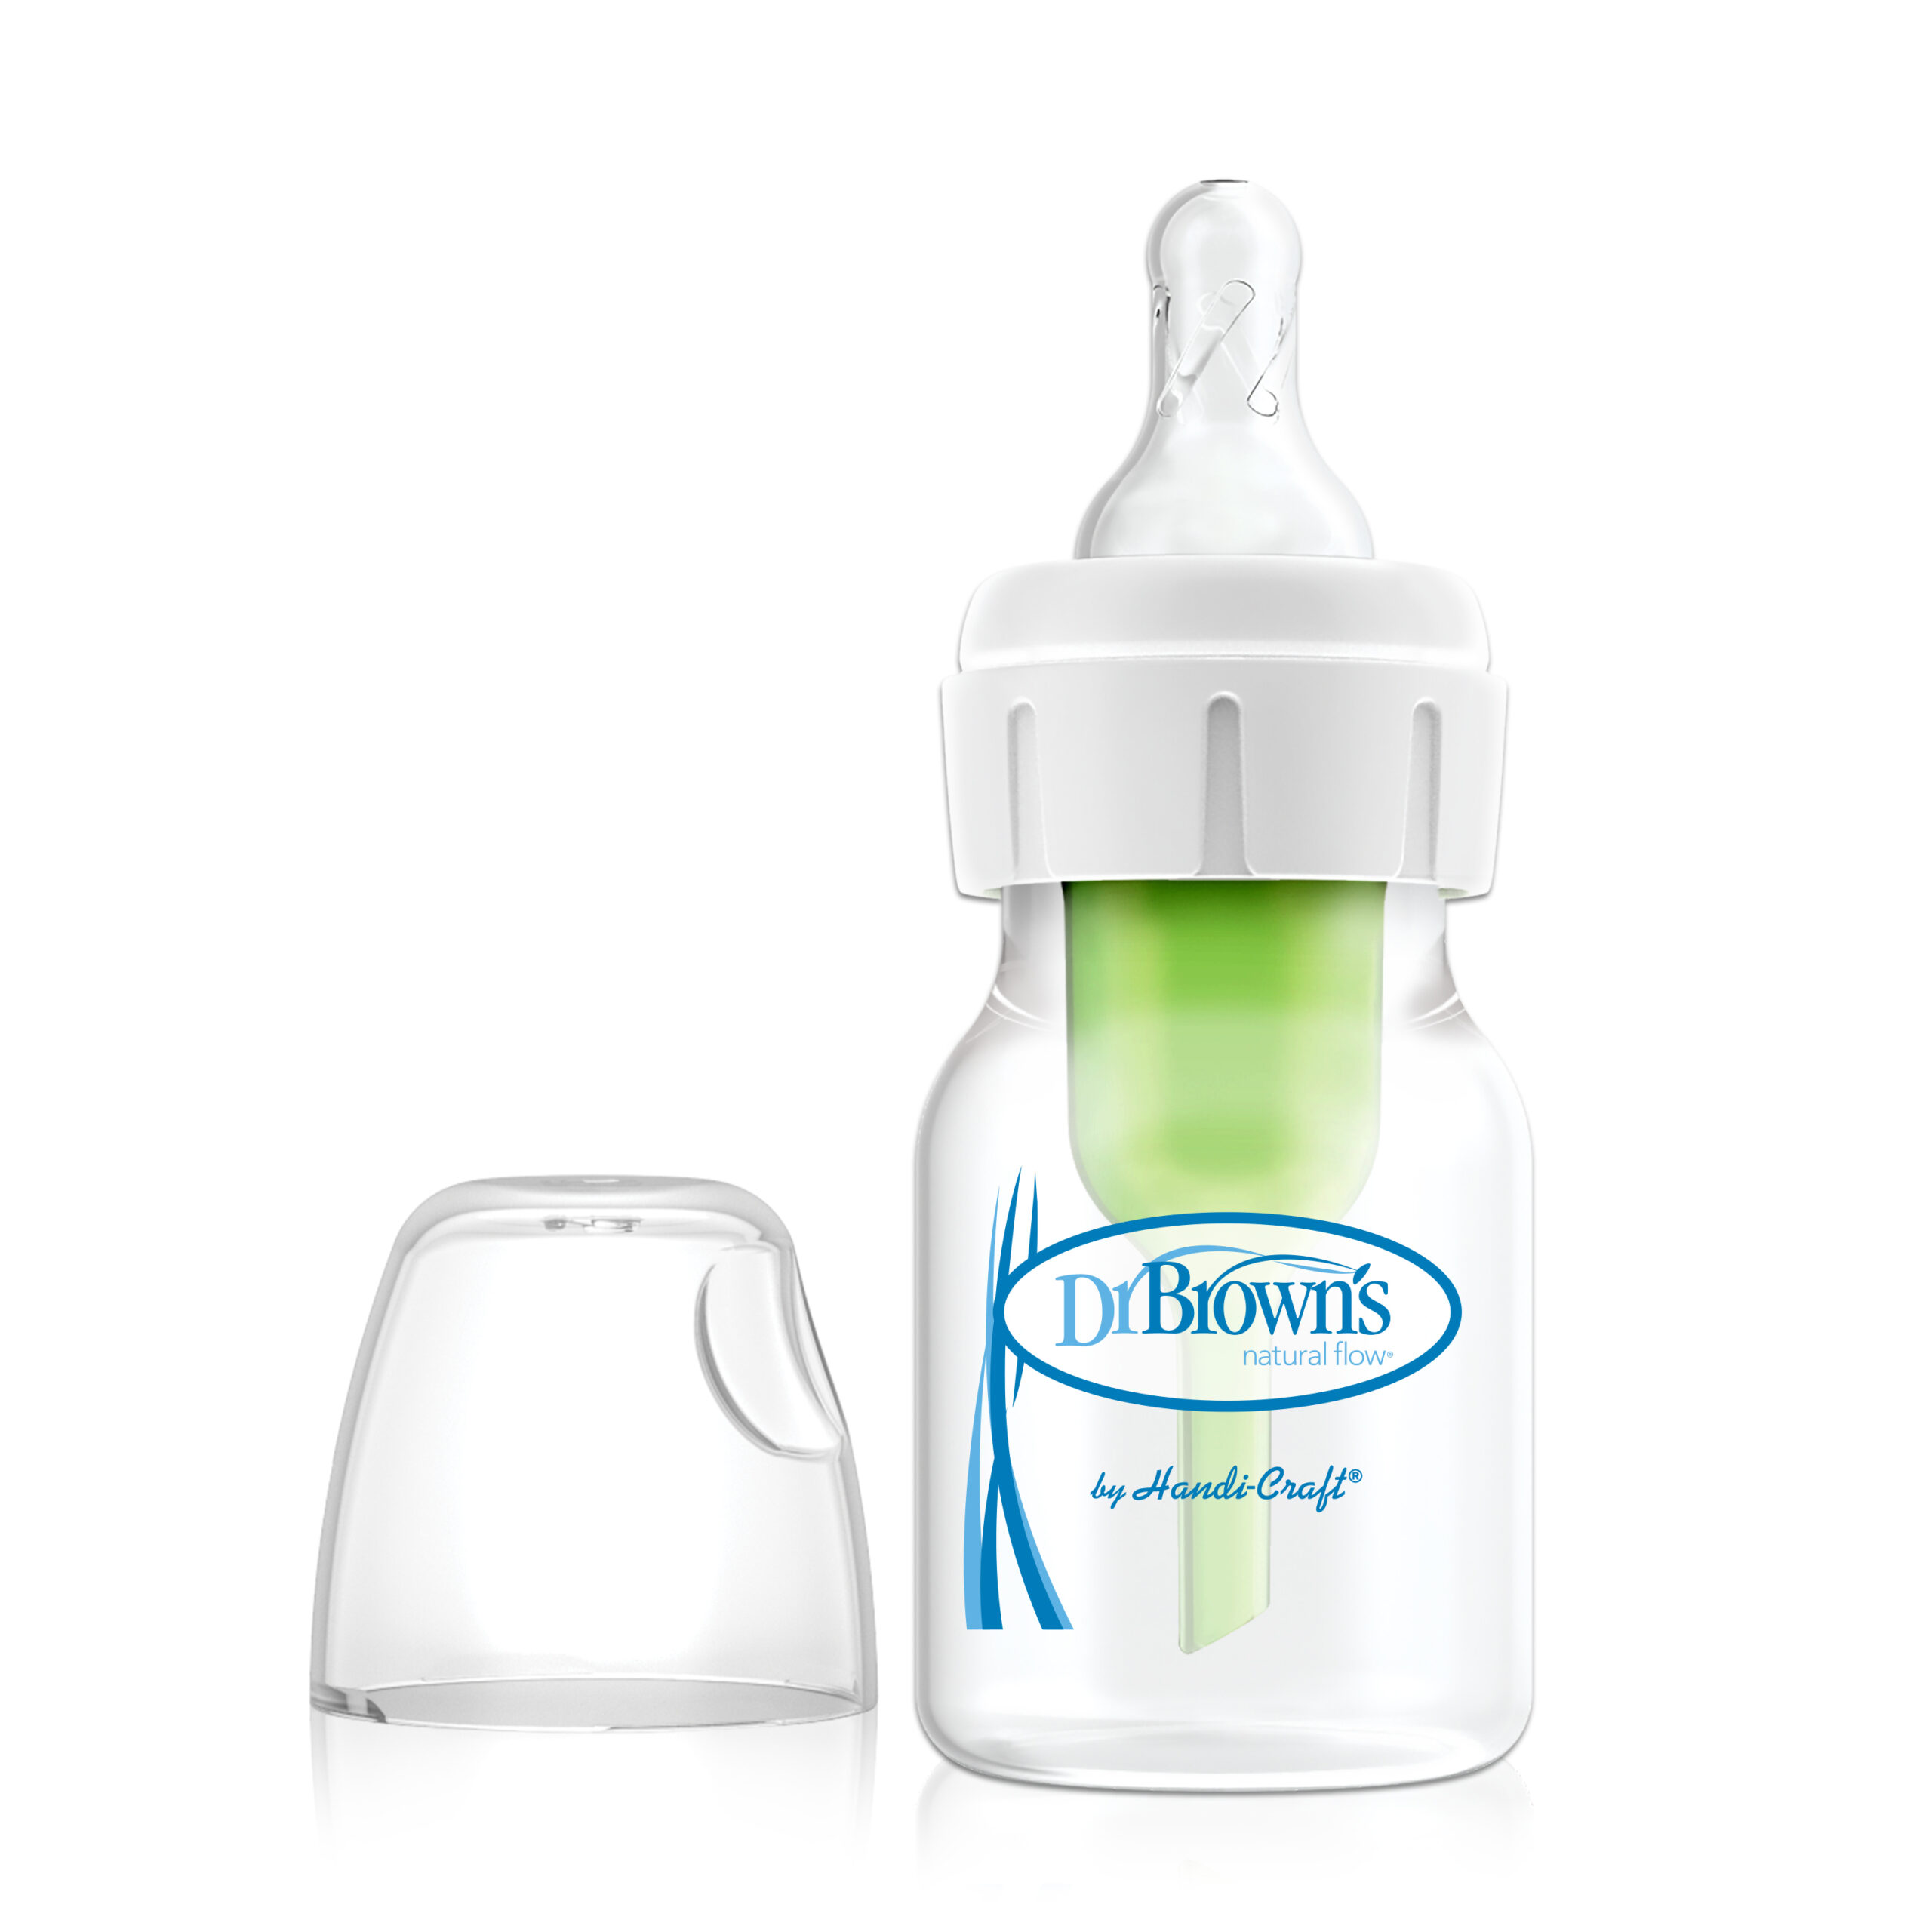 Dr. Options+ Anti-colic Bottle | Standaard 60 ml Dr. Brown's